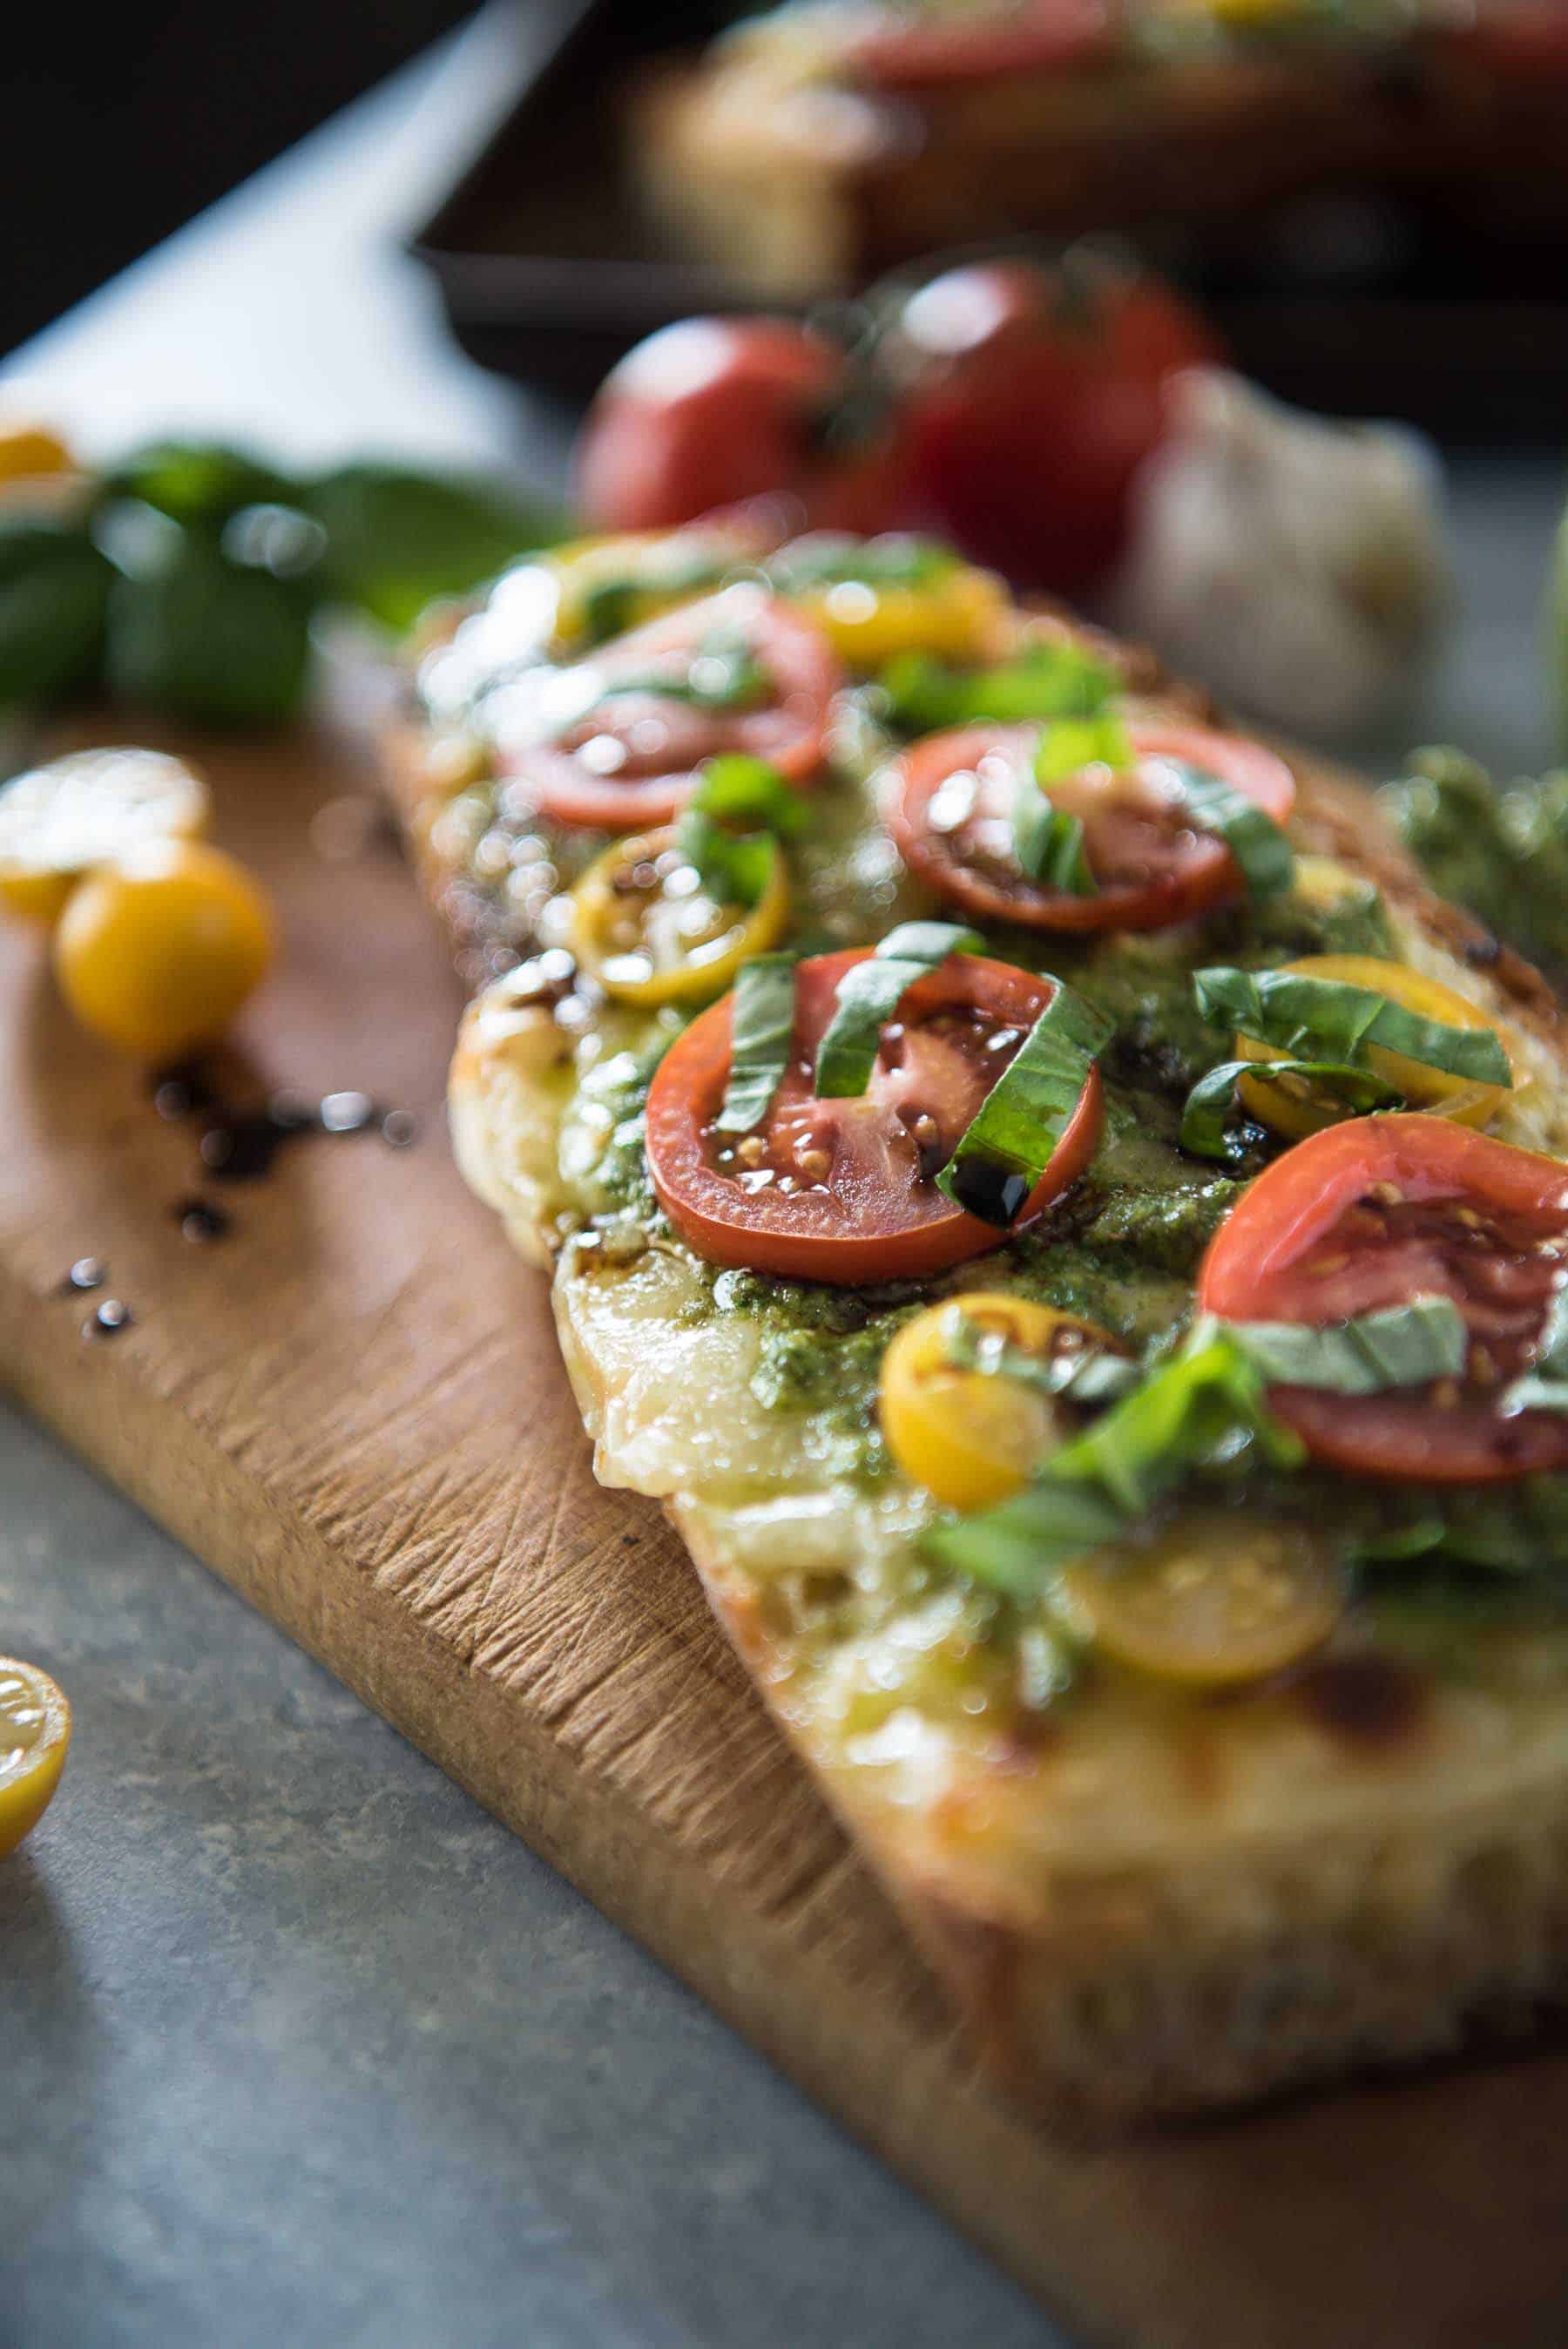 Whether you pair it with your favorite pasta dish or call it dinner by itself, this Caprese Garlic Bread with Arugula Pesto will please the palate of any lover of Italian cuisine!